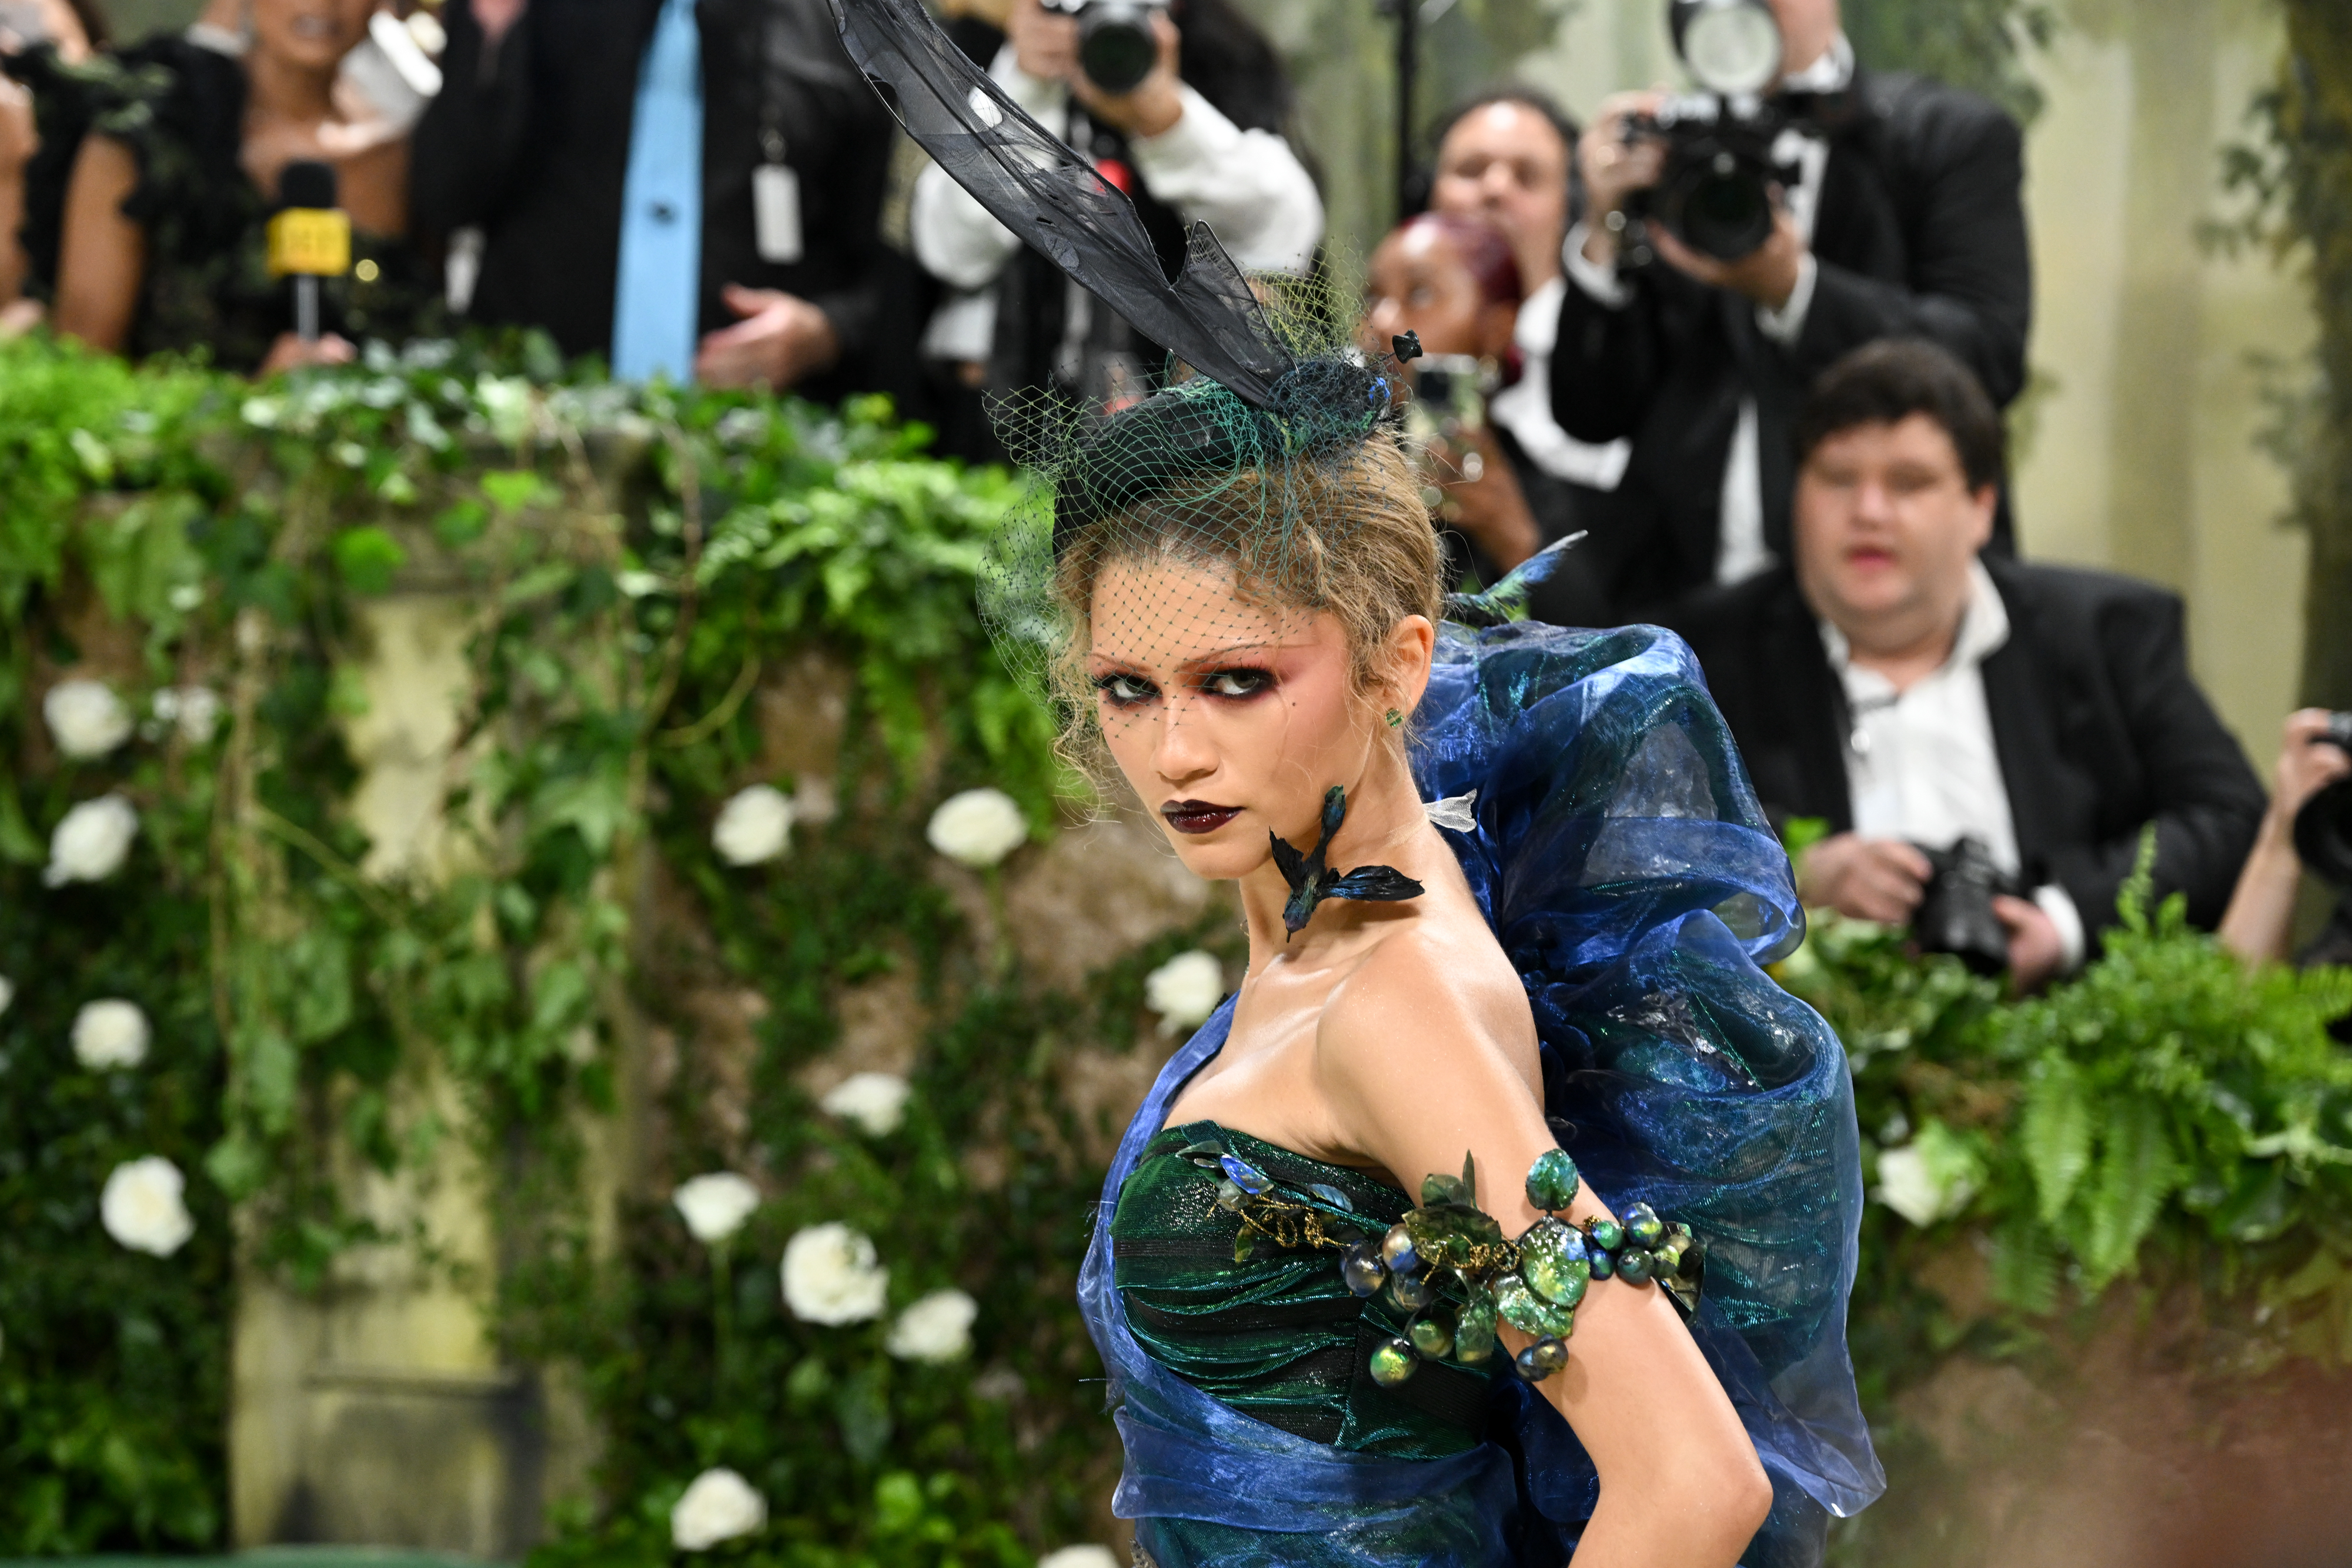 Zendaya in an avant-garde blue outfit with photographers in the background